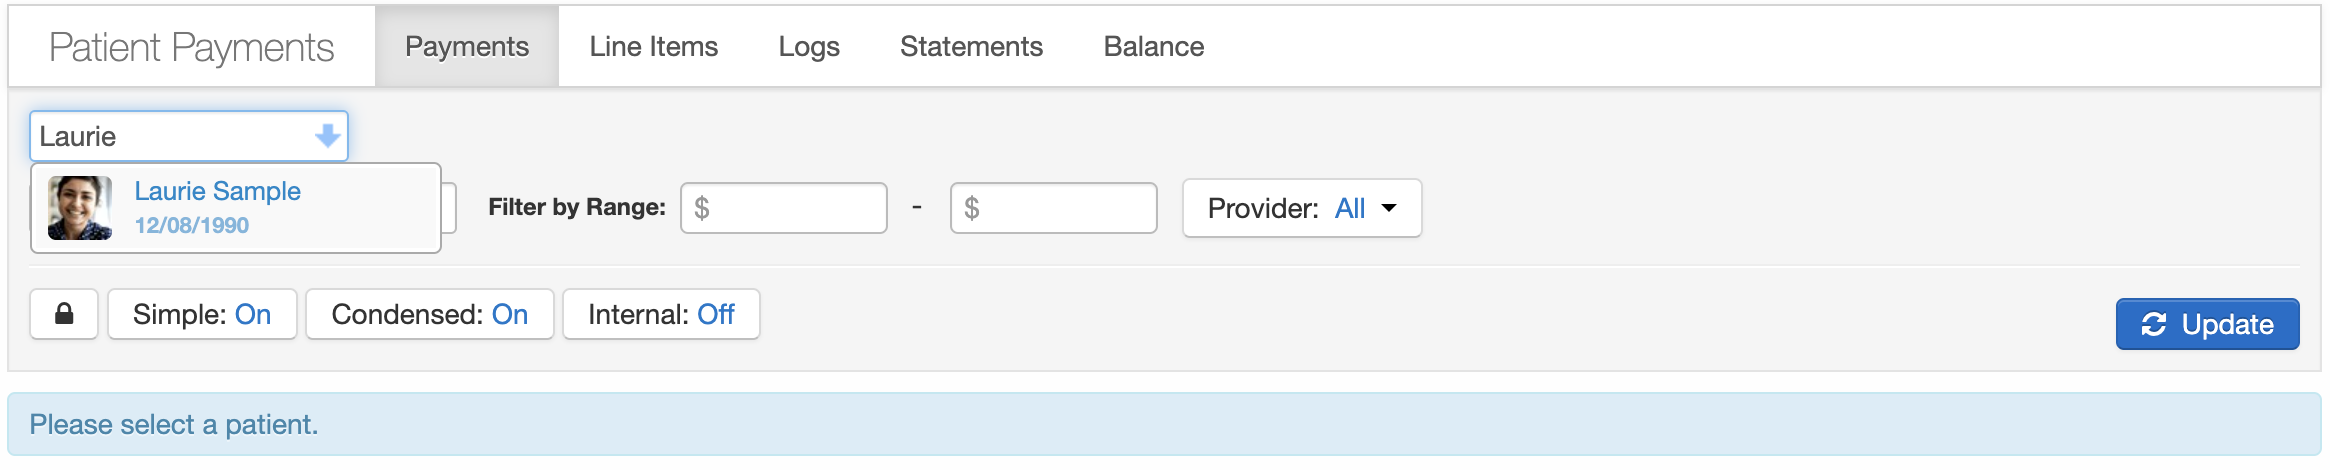 Patient_Payment_Search.png